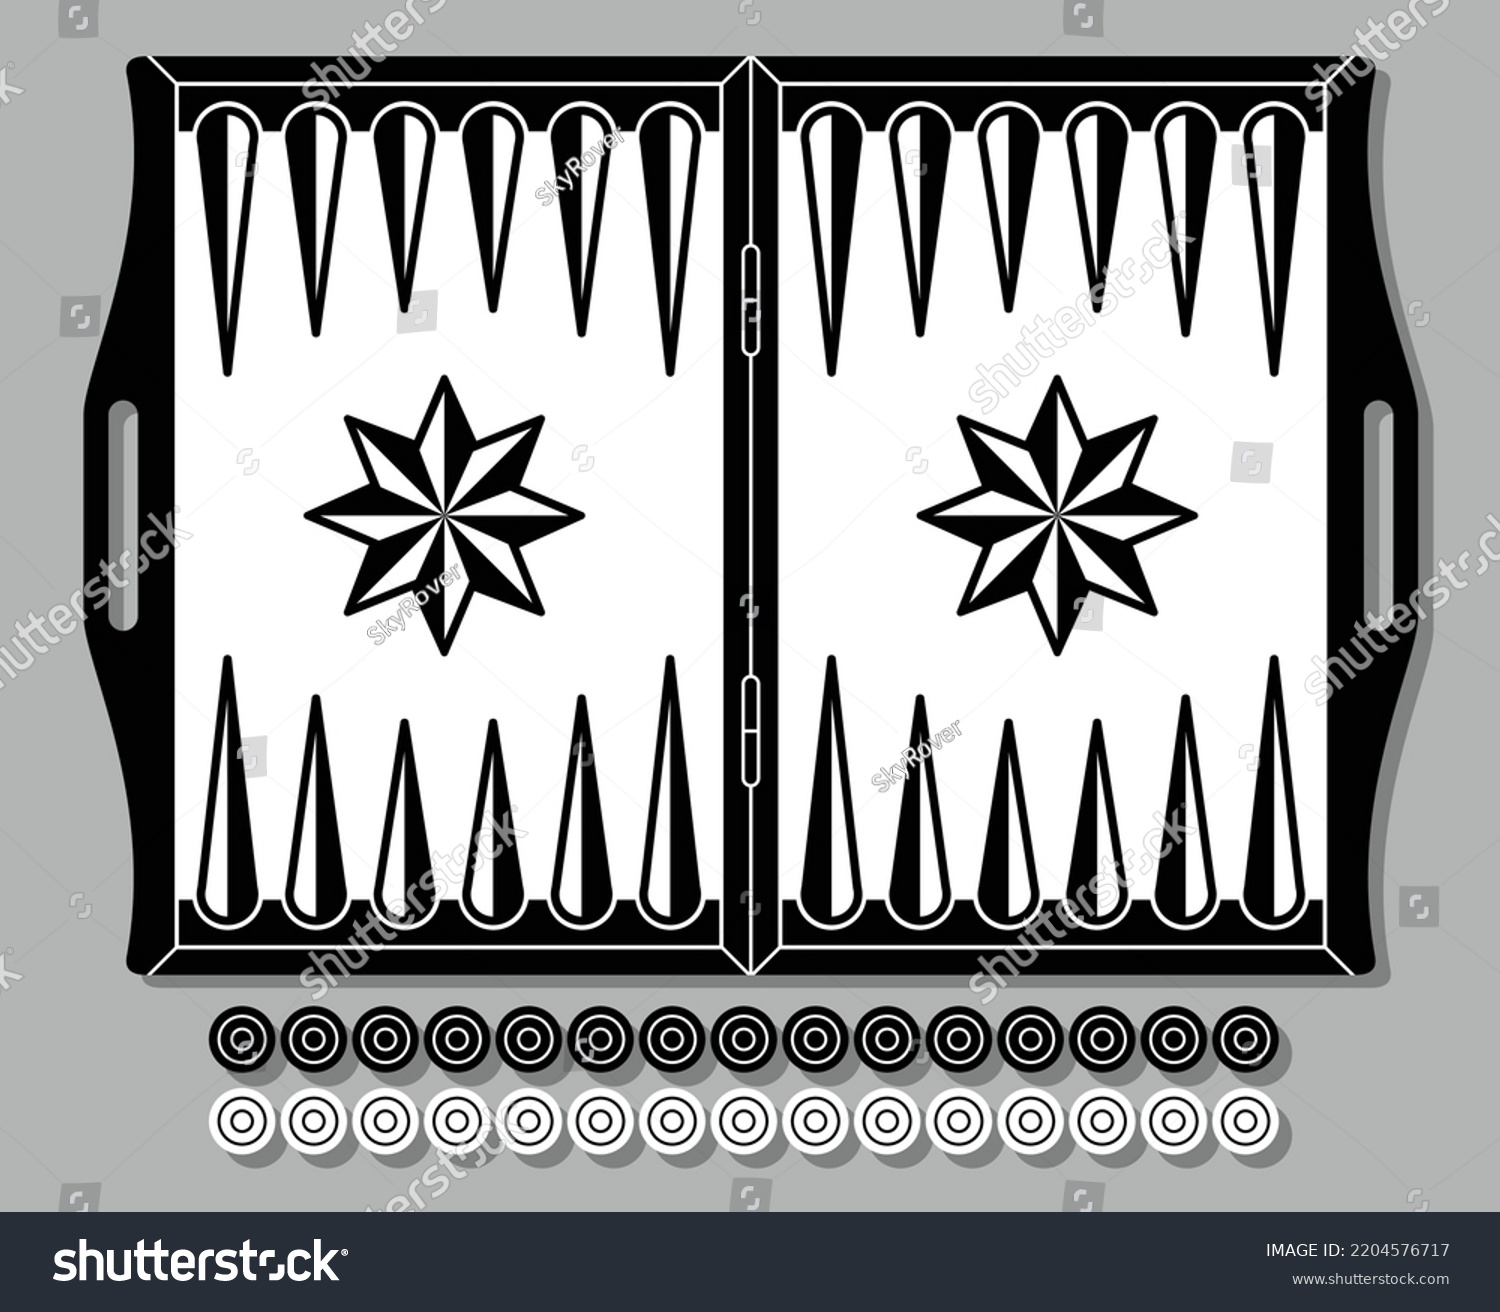 SVG of Traditional Backgammon, Turkish, Lebanese, Arabic Game Board - Vector Illustration Isolated Icon svg